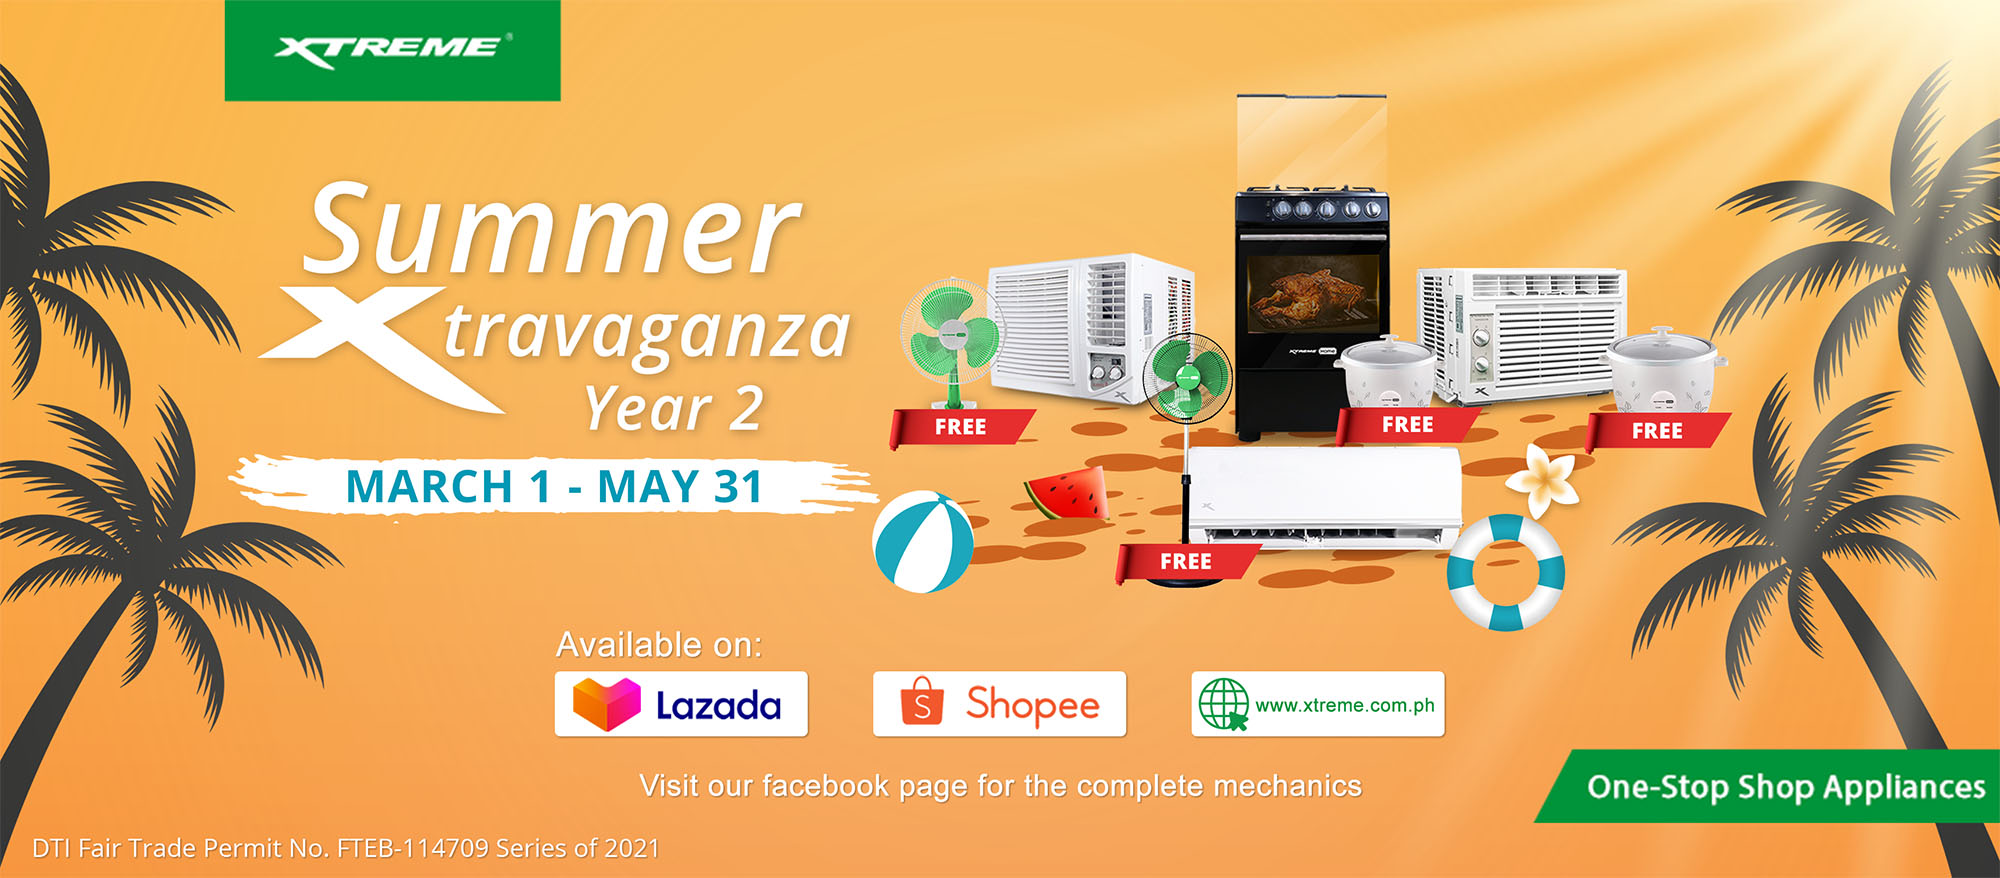 Get another FREE appliance at XTREME Summer Xtravaganza Bundle Promo Year 2